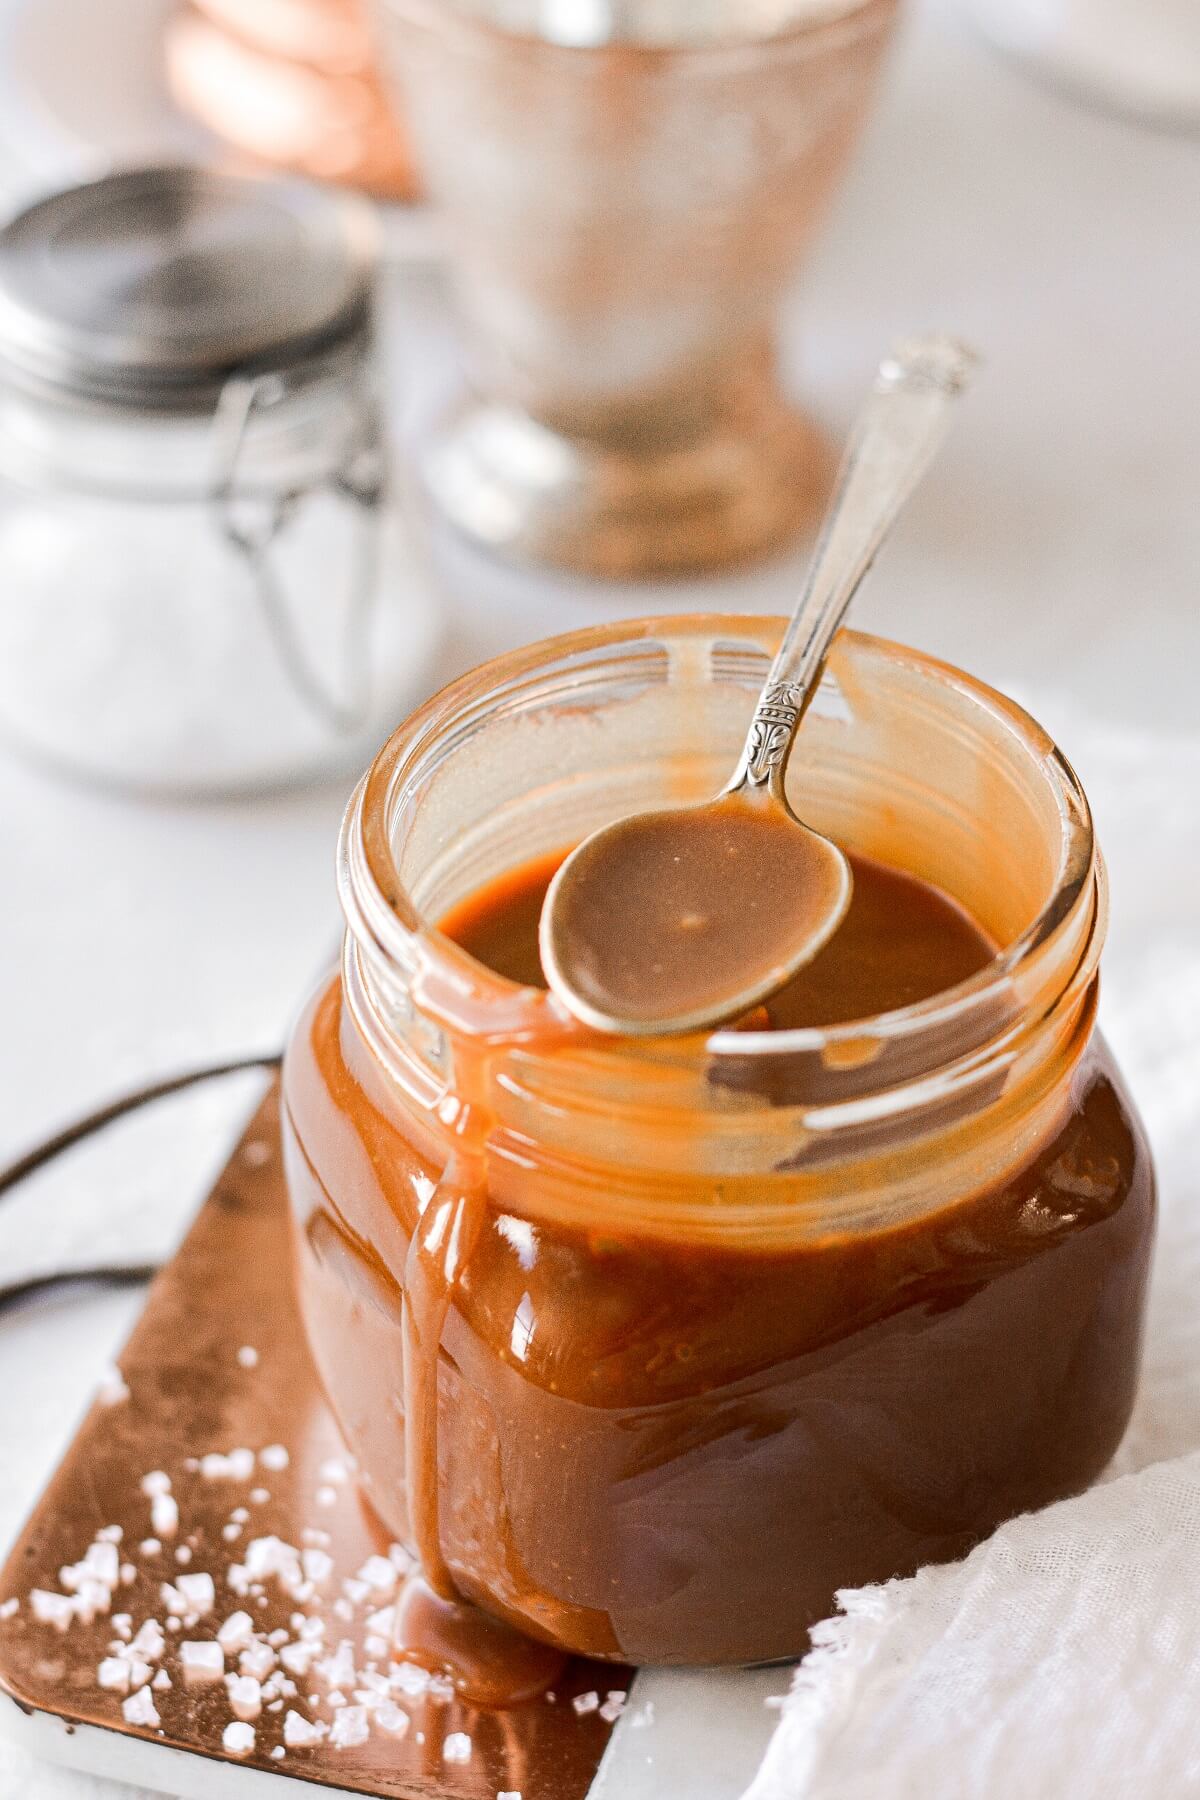 A jar of salted caramel sauce with a spoon resting on top.